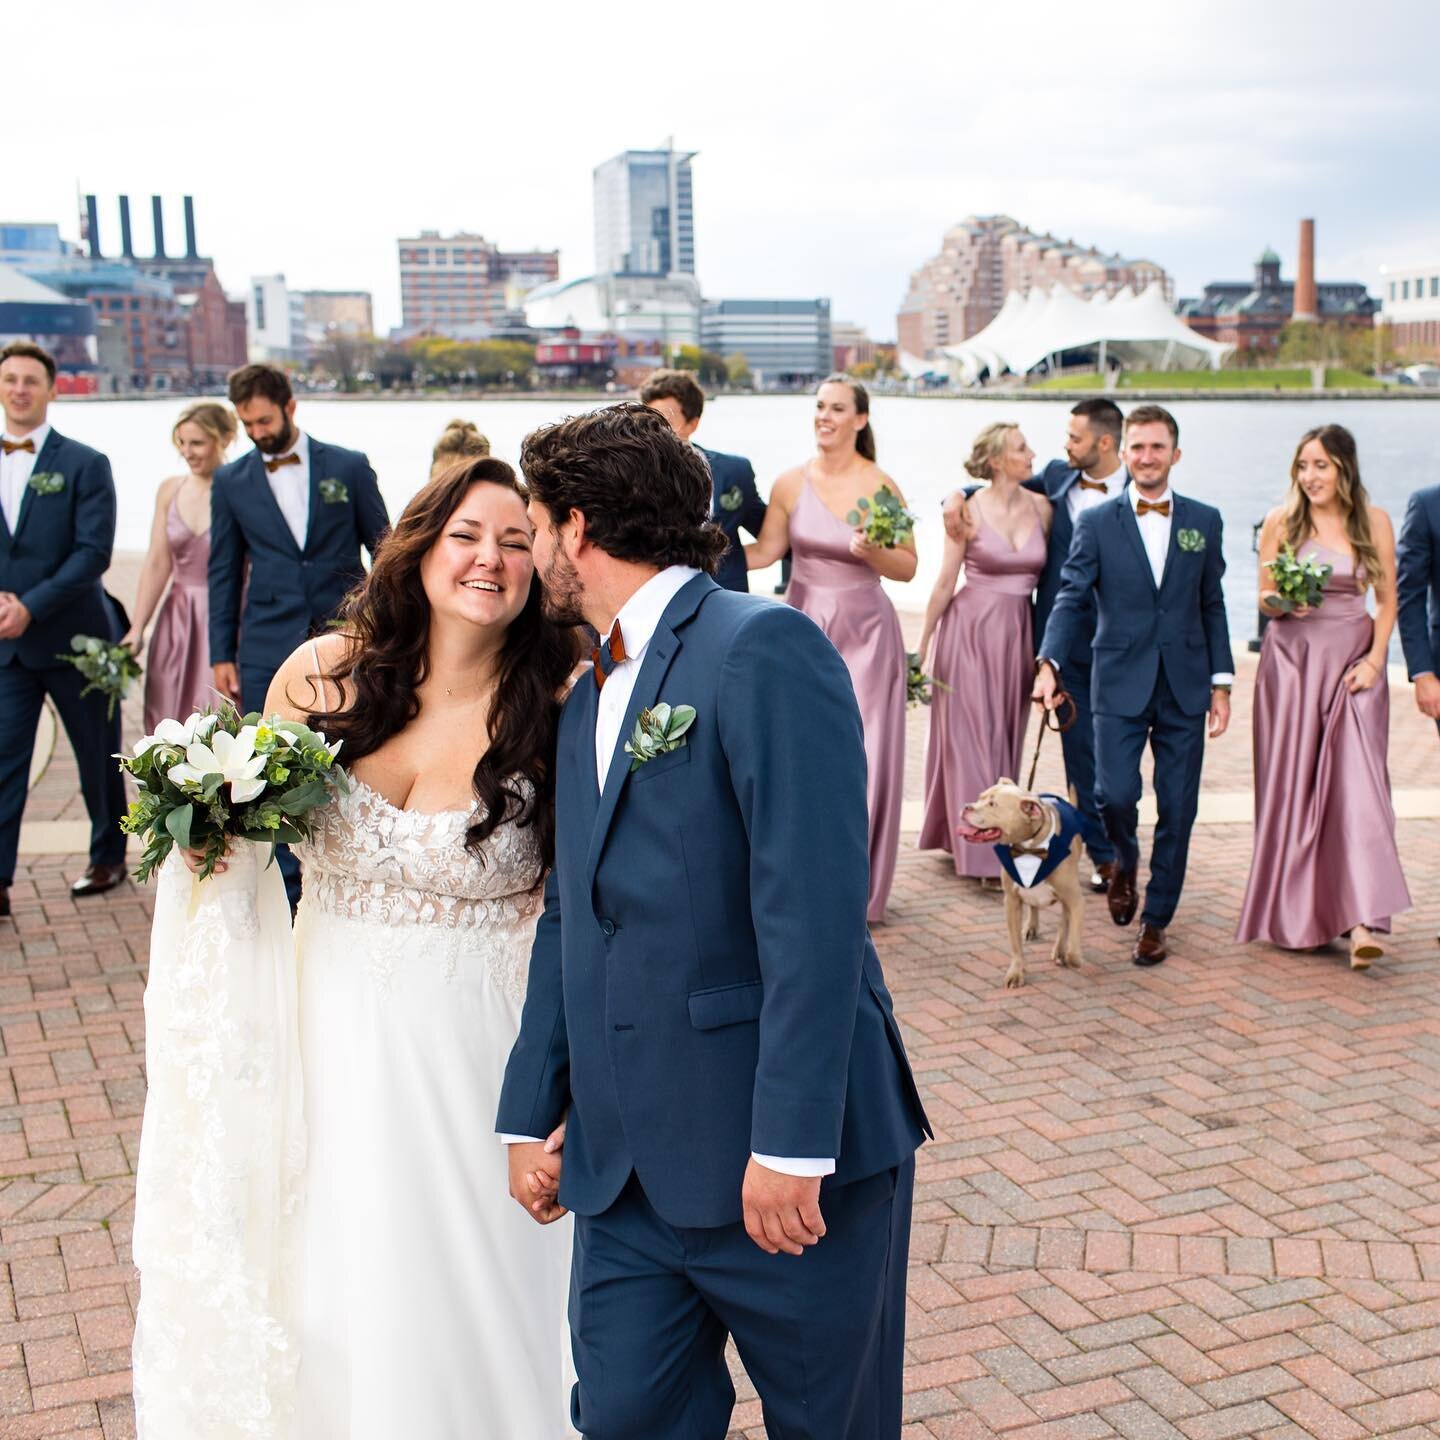 One of the many reasons why we love @avamweddings  is because this view is just a couple minutes walk away. This is one of the best spots of the harbor for portraits and wedding party because it&rsquo;s not super crowded and you can see all of the bu